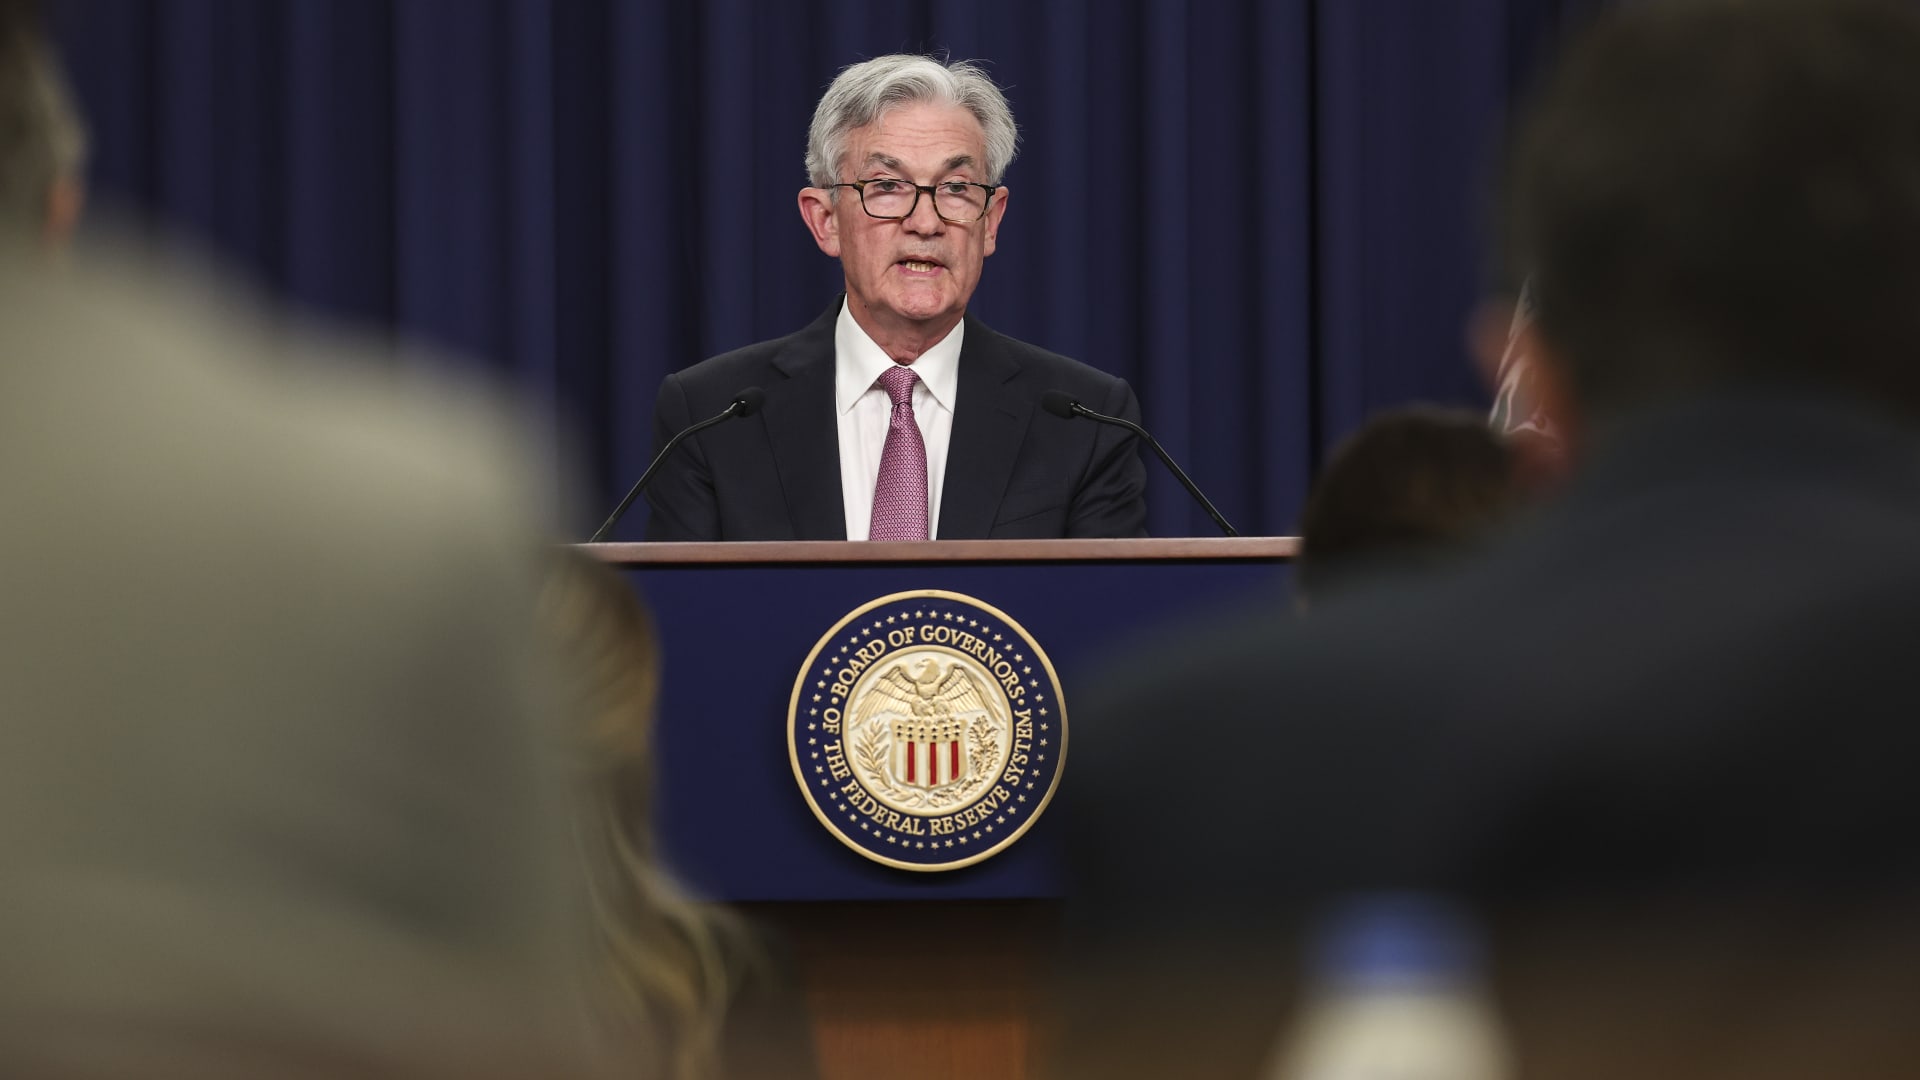 Federal Reserve Chairman Jerome Powell speaks at a news conference following a Federal Open Market Committee meeting on May 04, 2022 in Washington, DC. Powell announced the Federal Reserve is raising interest rates by a half-percentage point to combat record high inflation. 